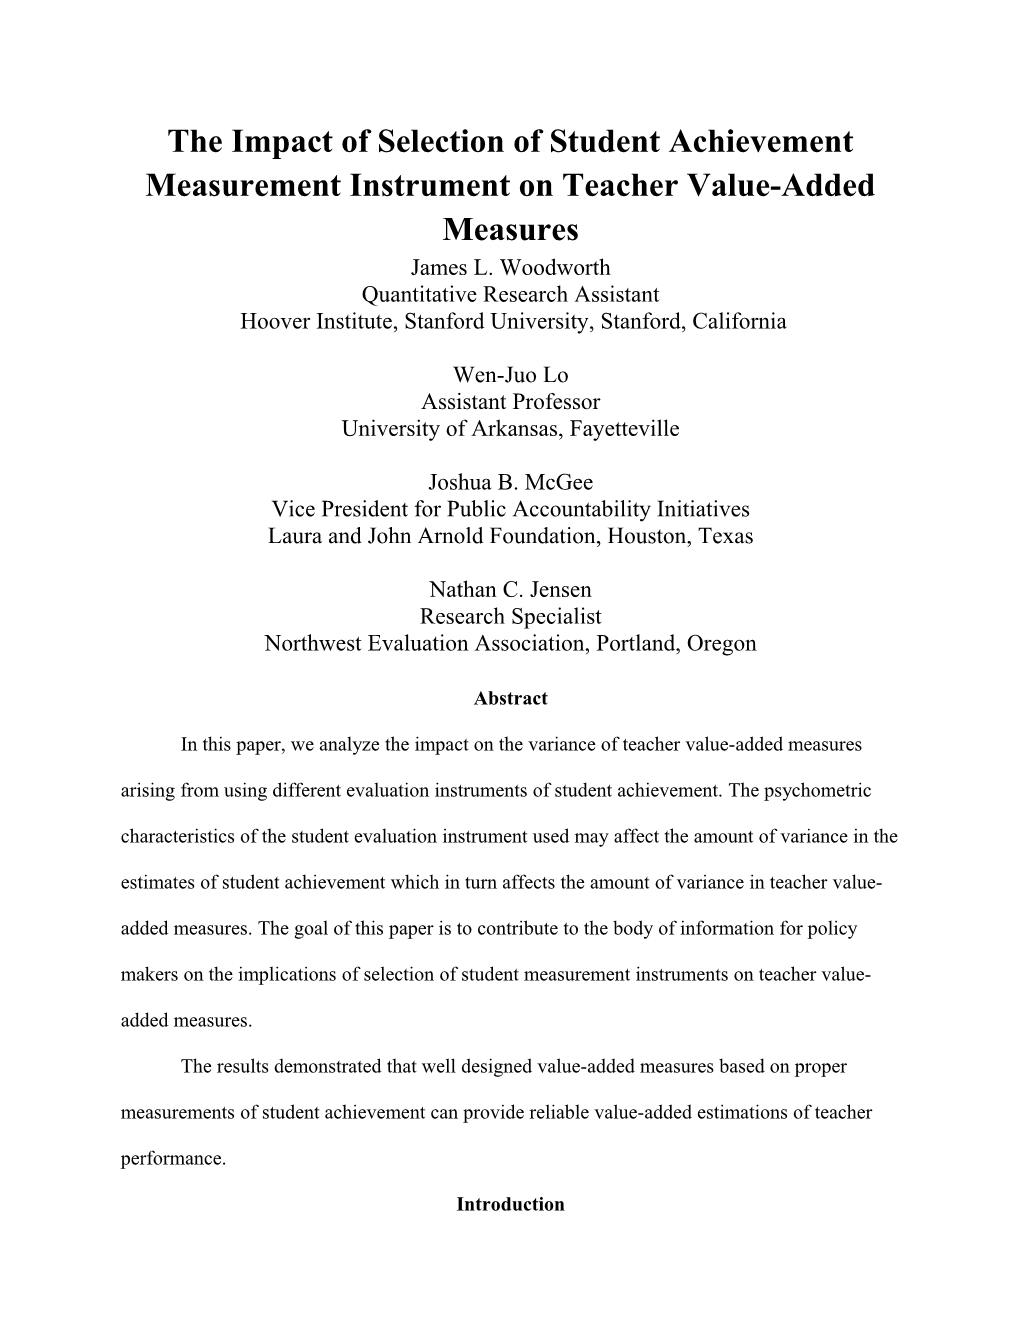 The Impact of Selection of Student Achievement Measurement Instrument on Teacher Value-Added